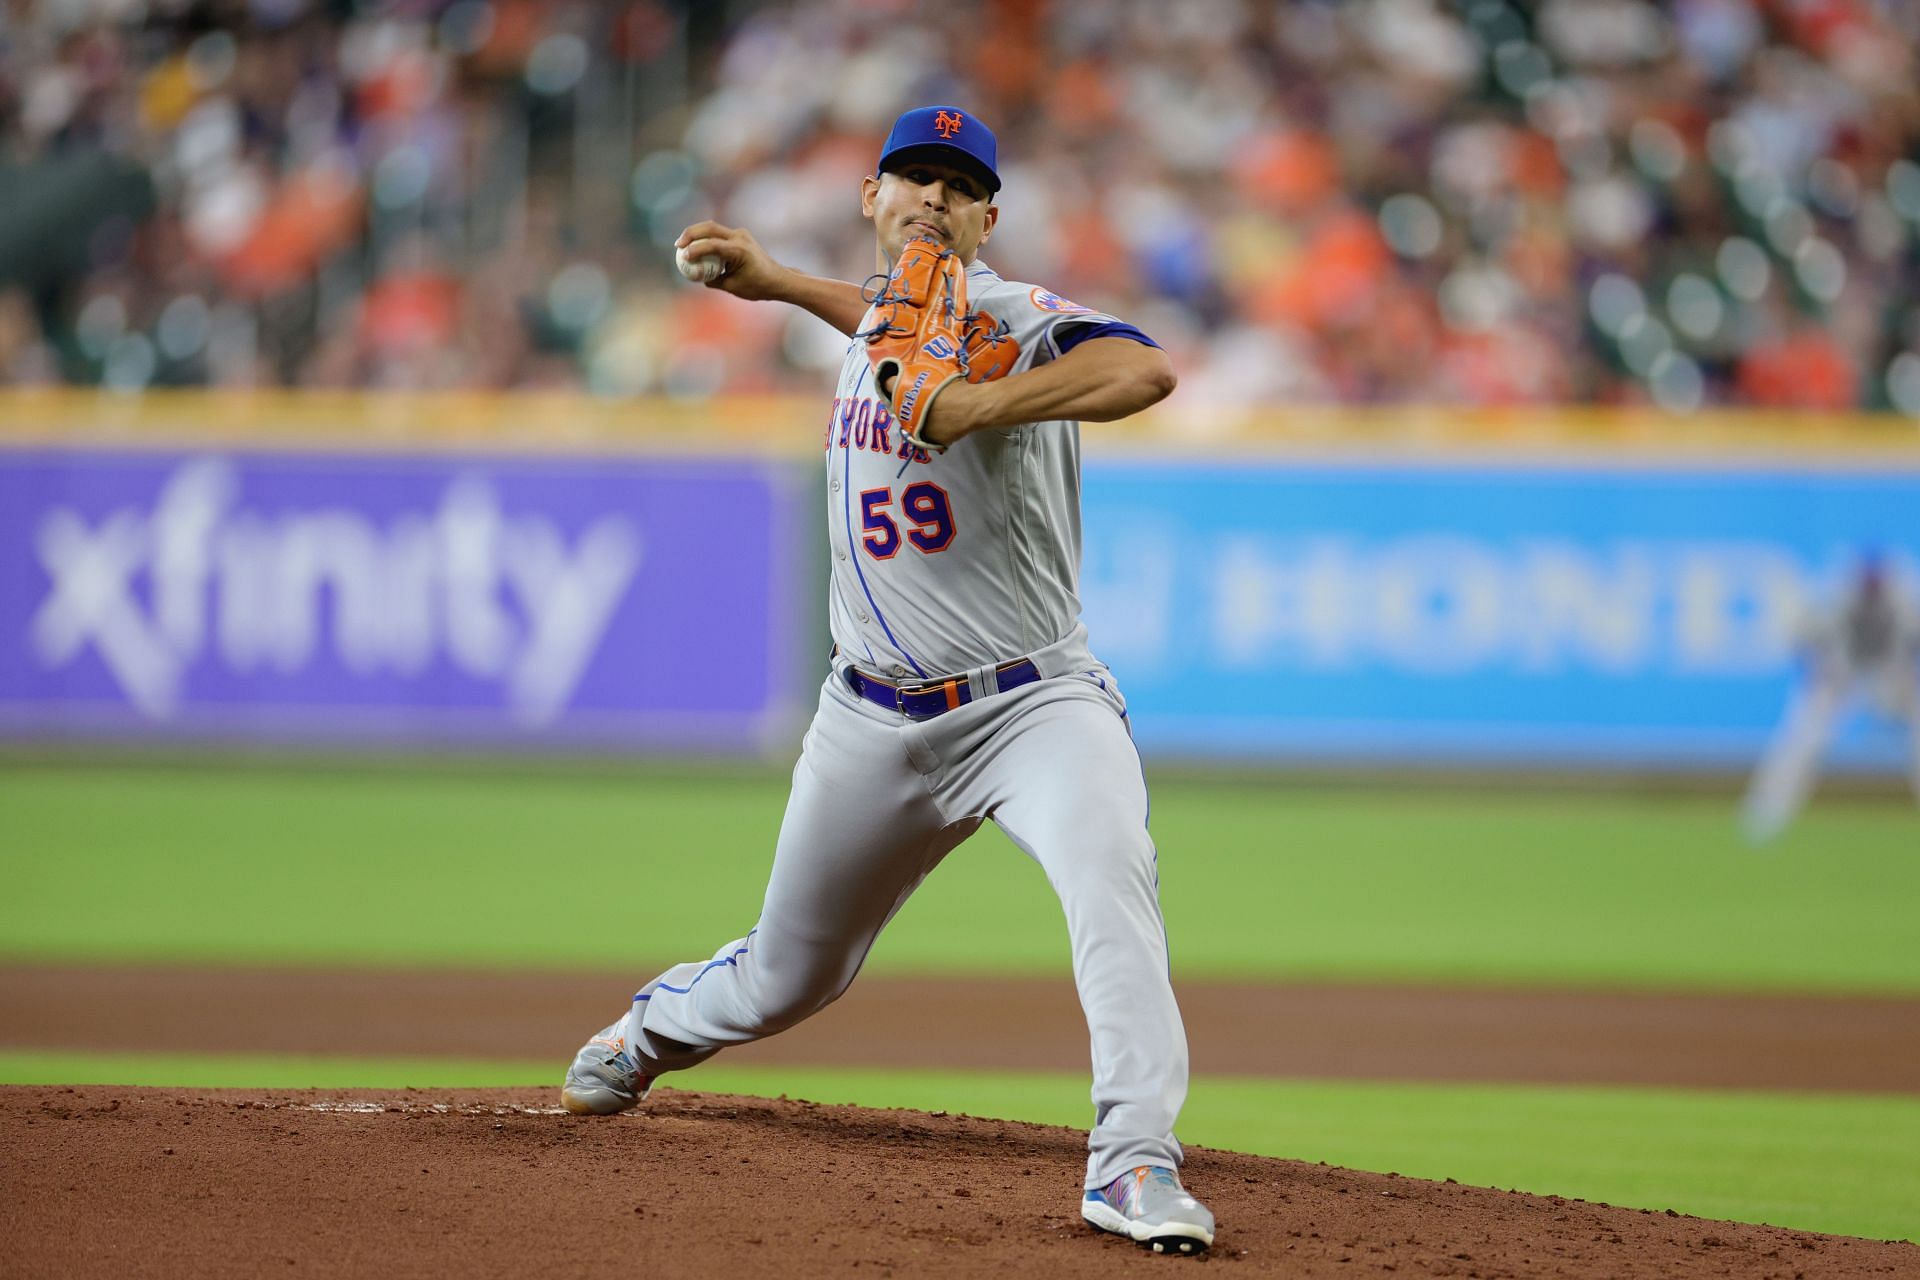 New York Mets starter Carlos Carrasco lasted just 2.1 innings in today&#039;s game against the Houston Astros.